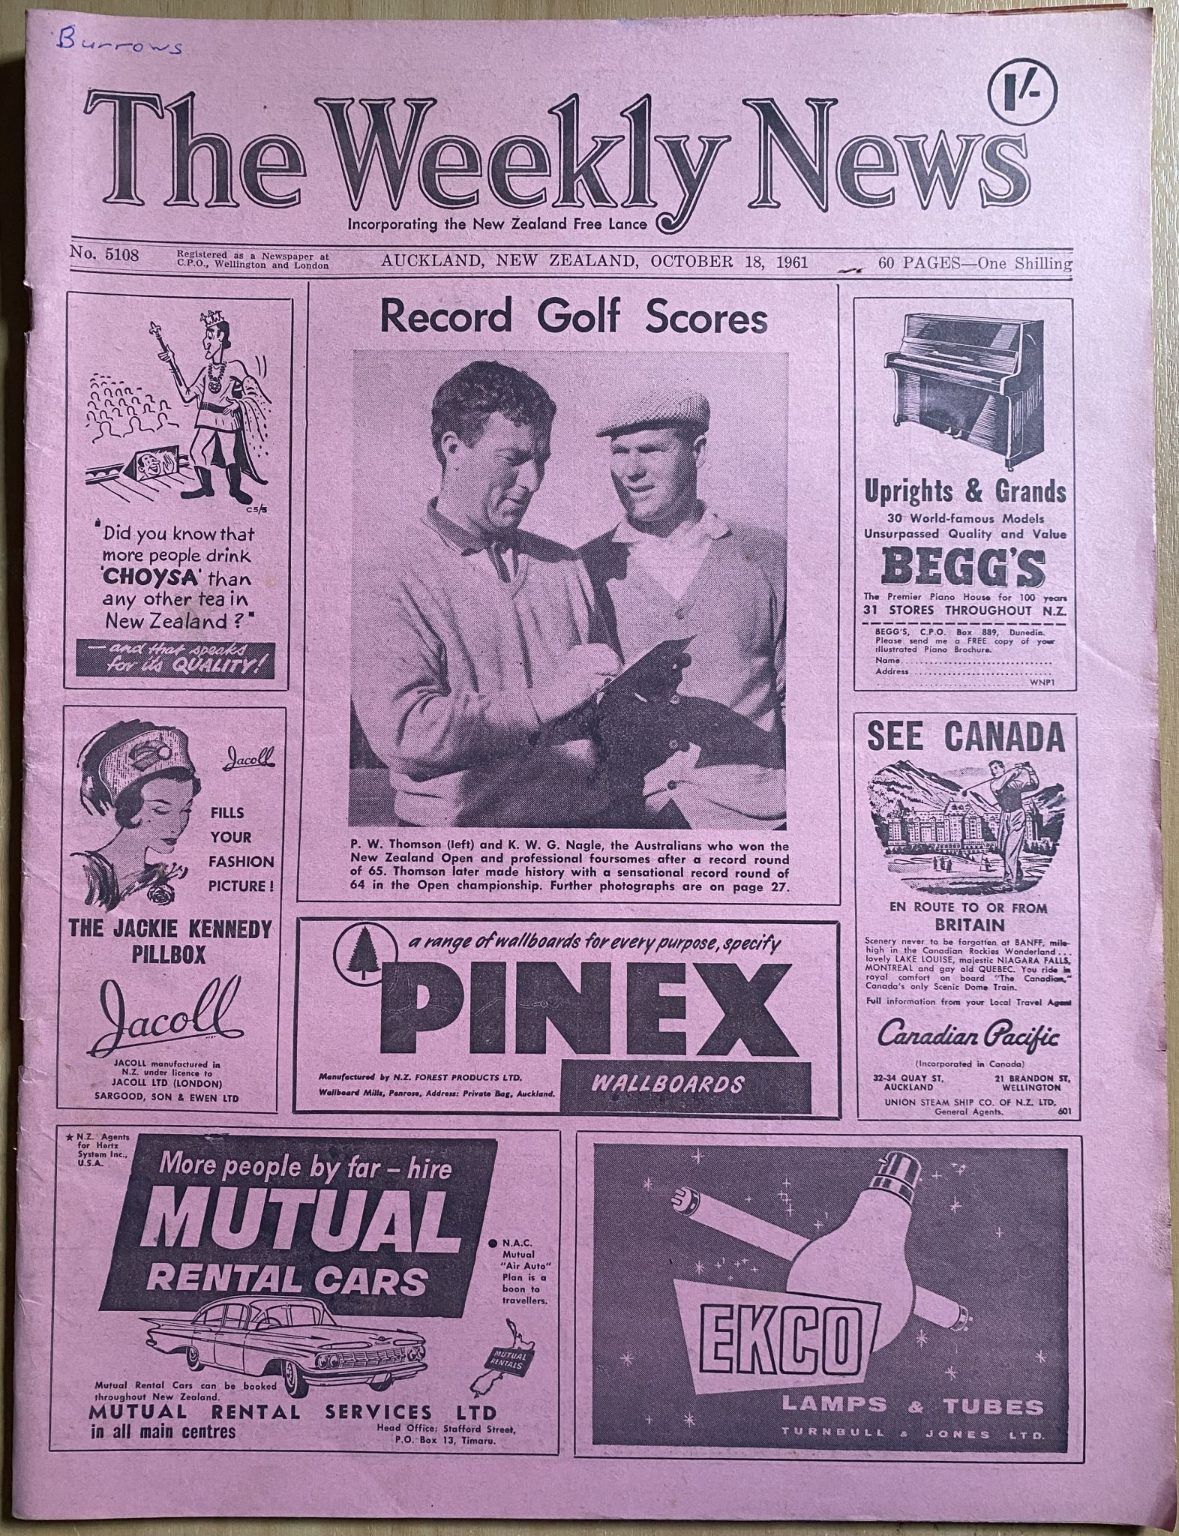 OLD NEWSPAPER: The Weekly News, No. 5108, 18 October 1961